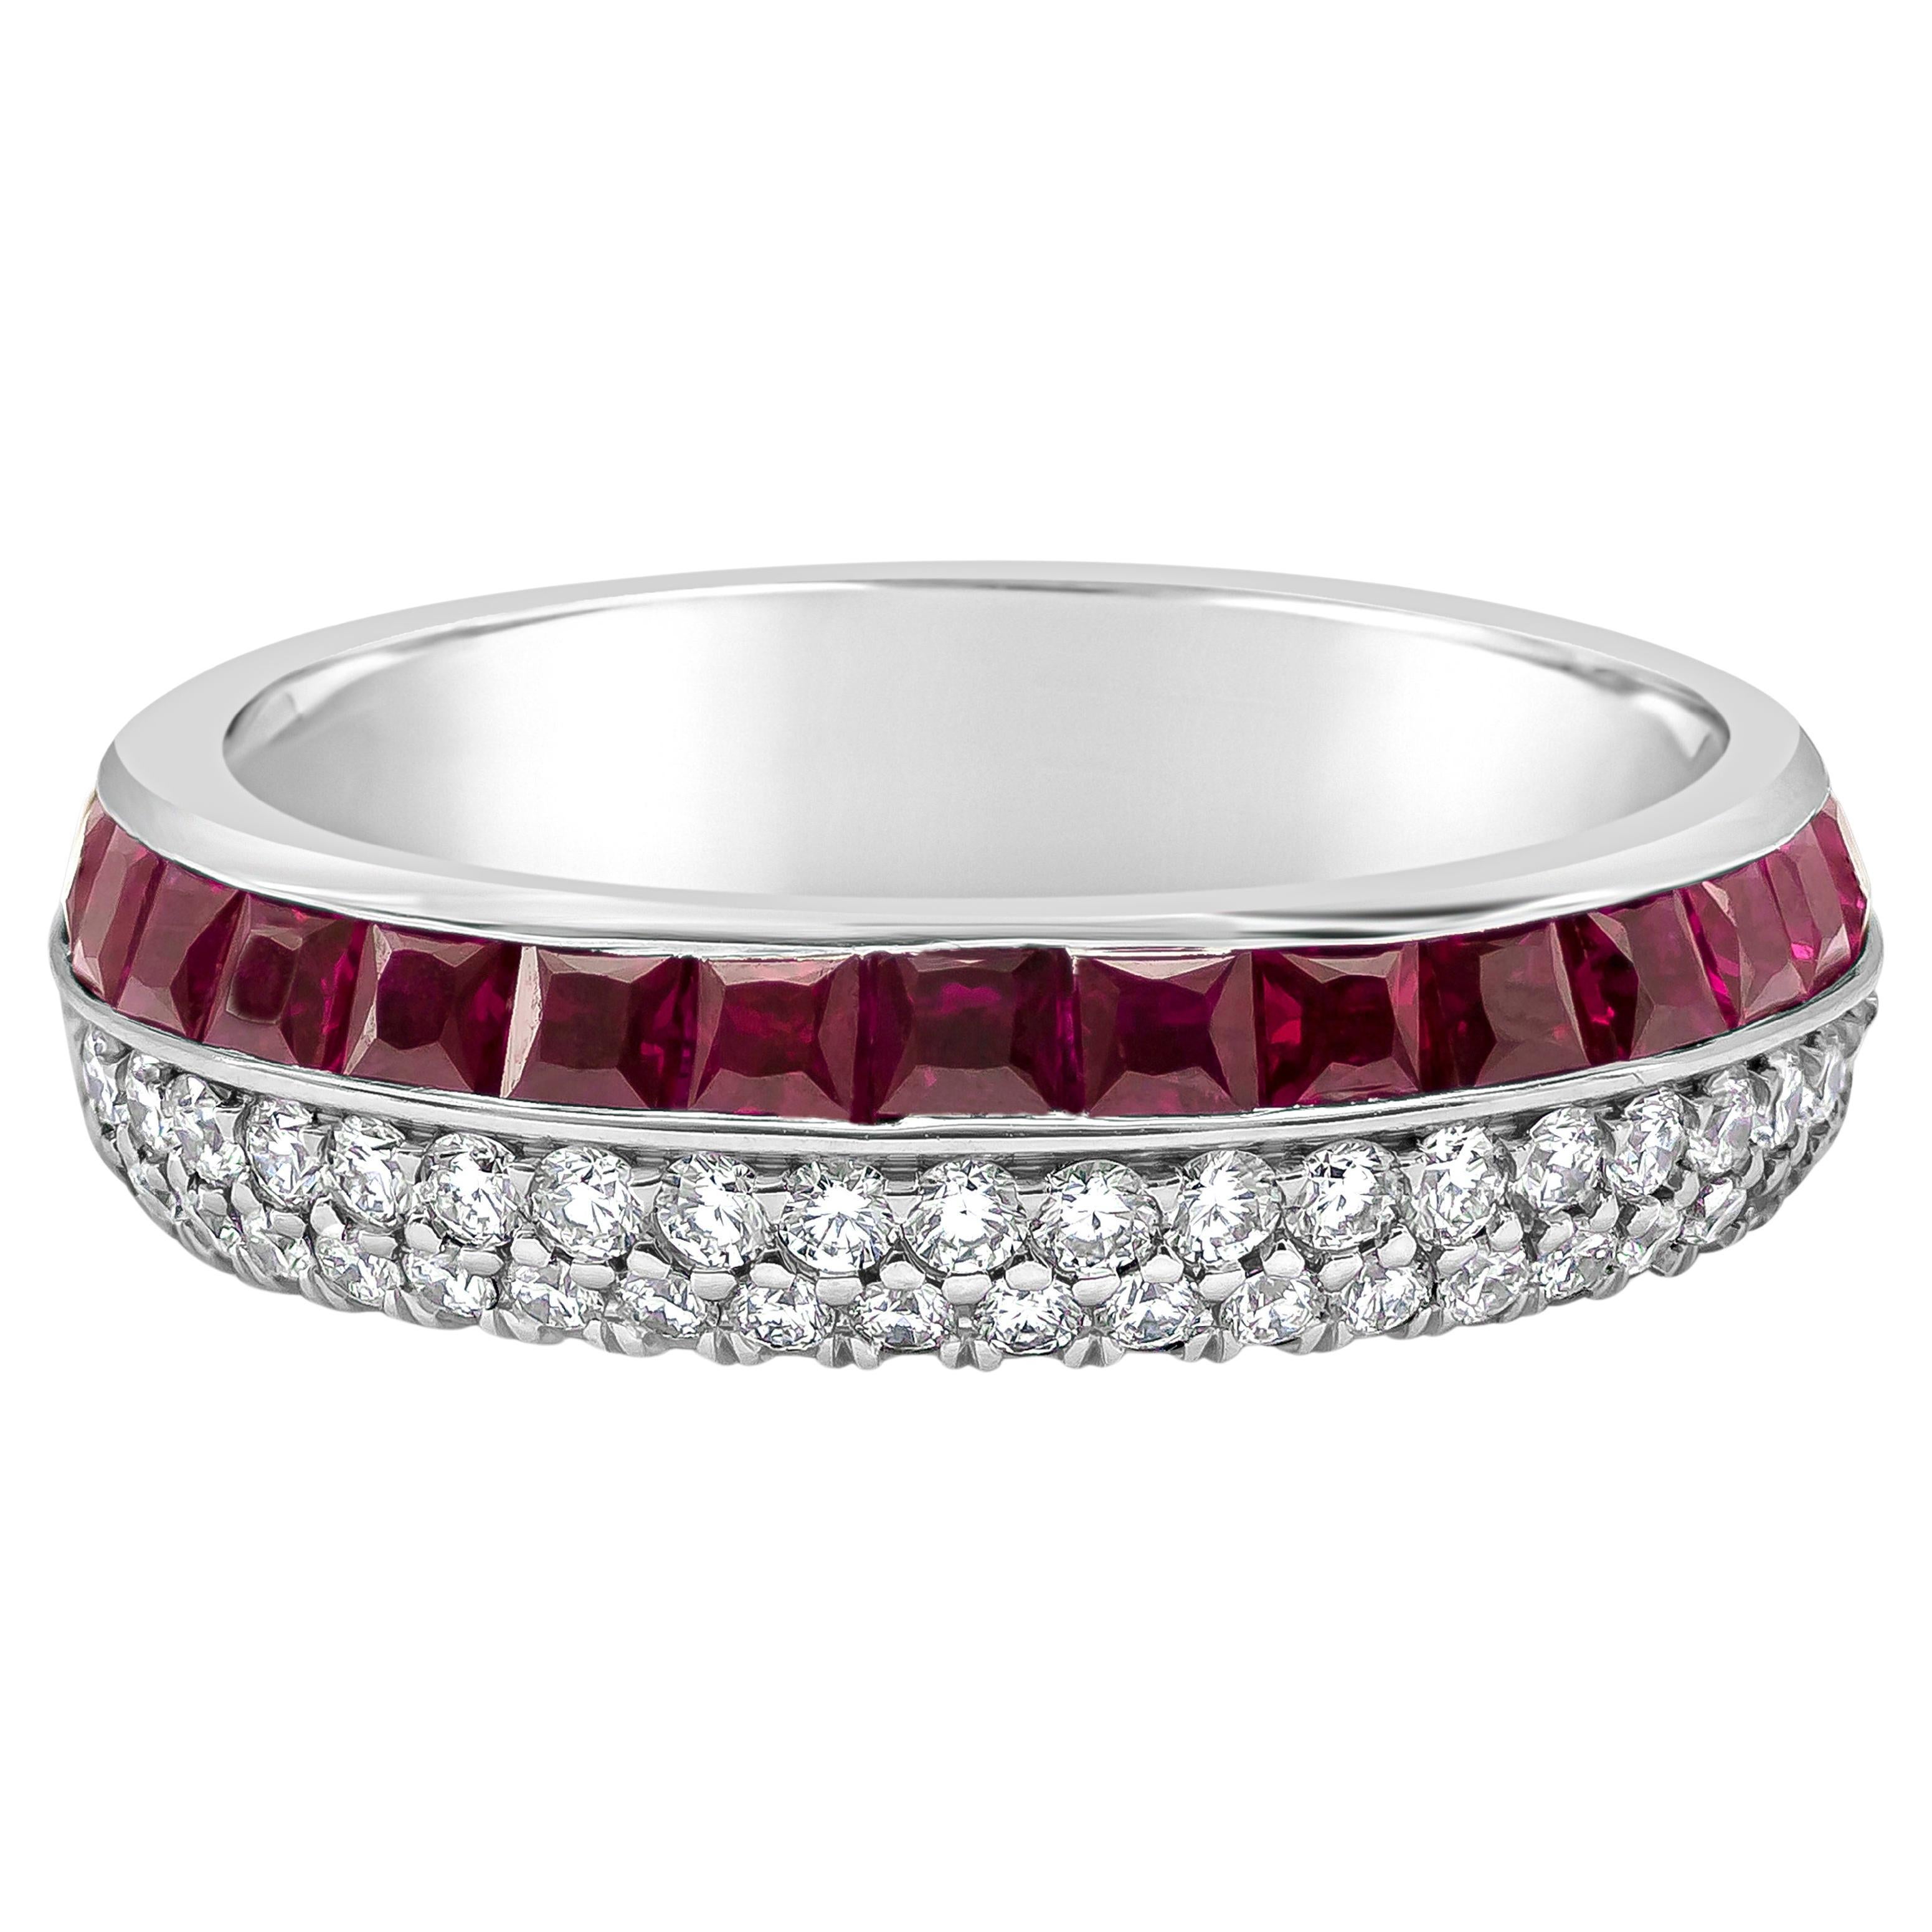 3.59 Carats Total Round Cut Ruby and Diamond Reversible Eternity Wedding Band